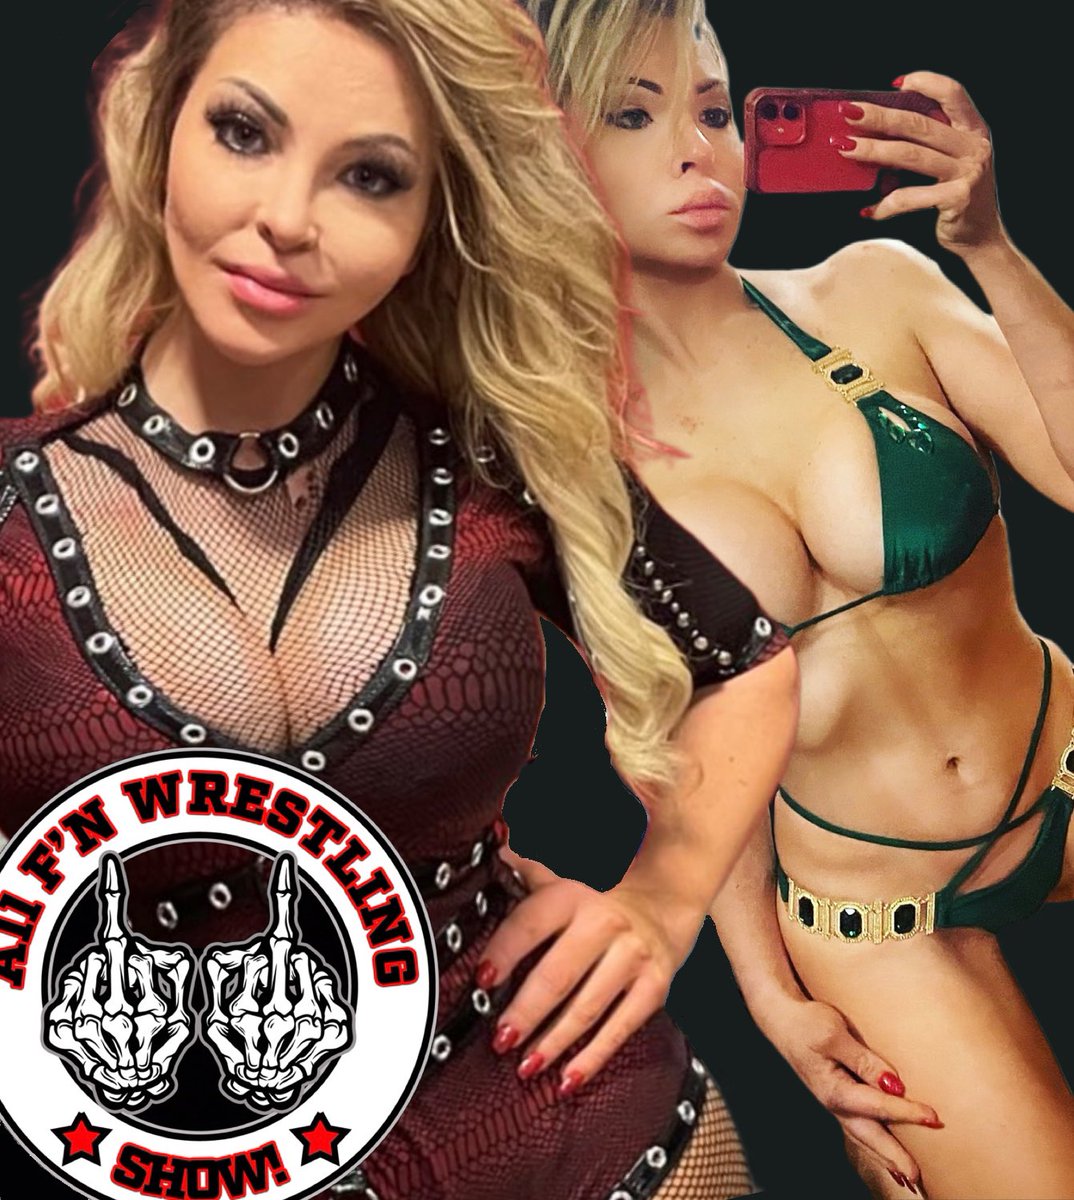 This Sunday LIvE on the All F’N Wrestling Show NWA Superstar & the face of F’N Wrestling @RealNMarkova answers your questions Find out about the Smashing pumpkins & how she became The Bad Ass With A Great Ass don’t miss it YouTube.com/fnwrestling 9:30am pacfic 12:30pm eastern